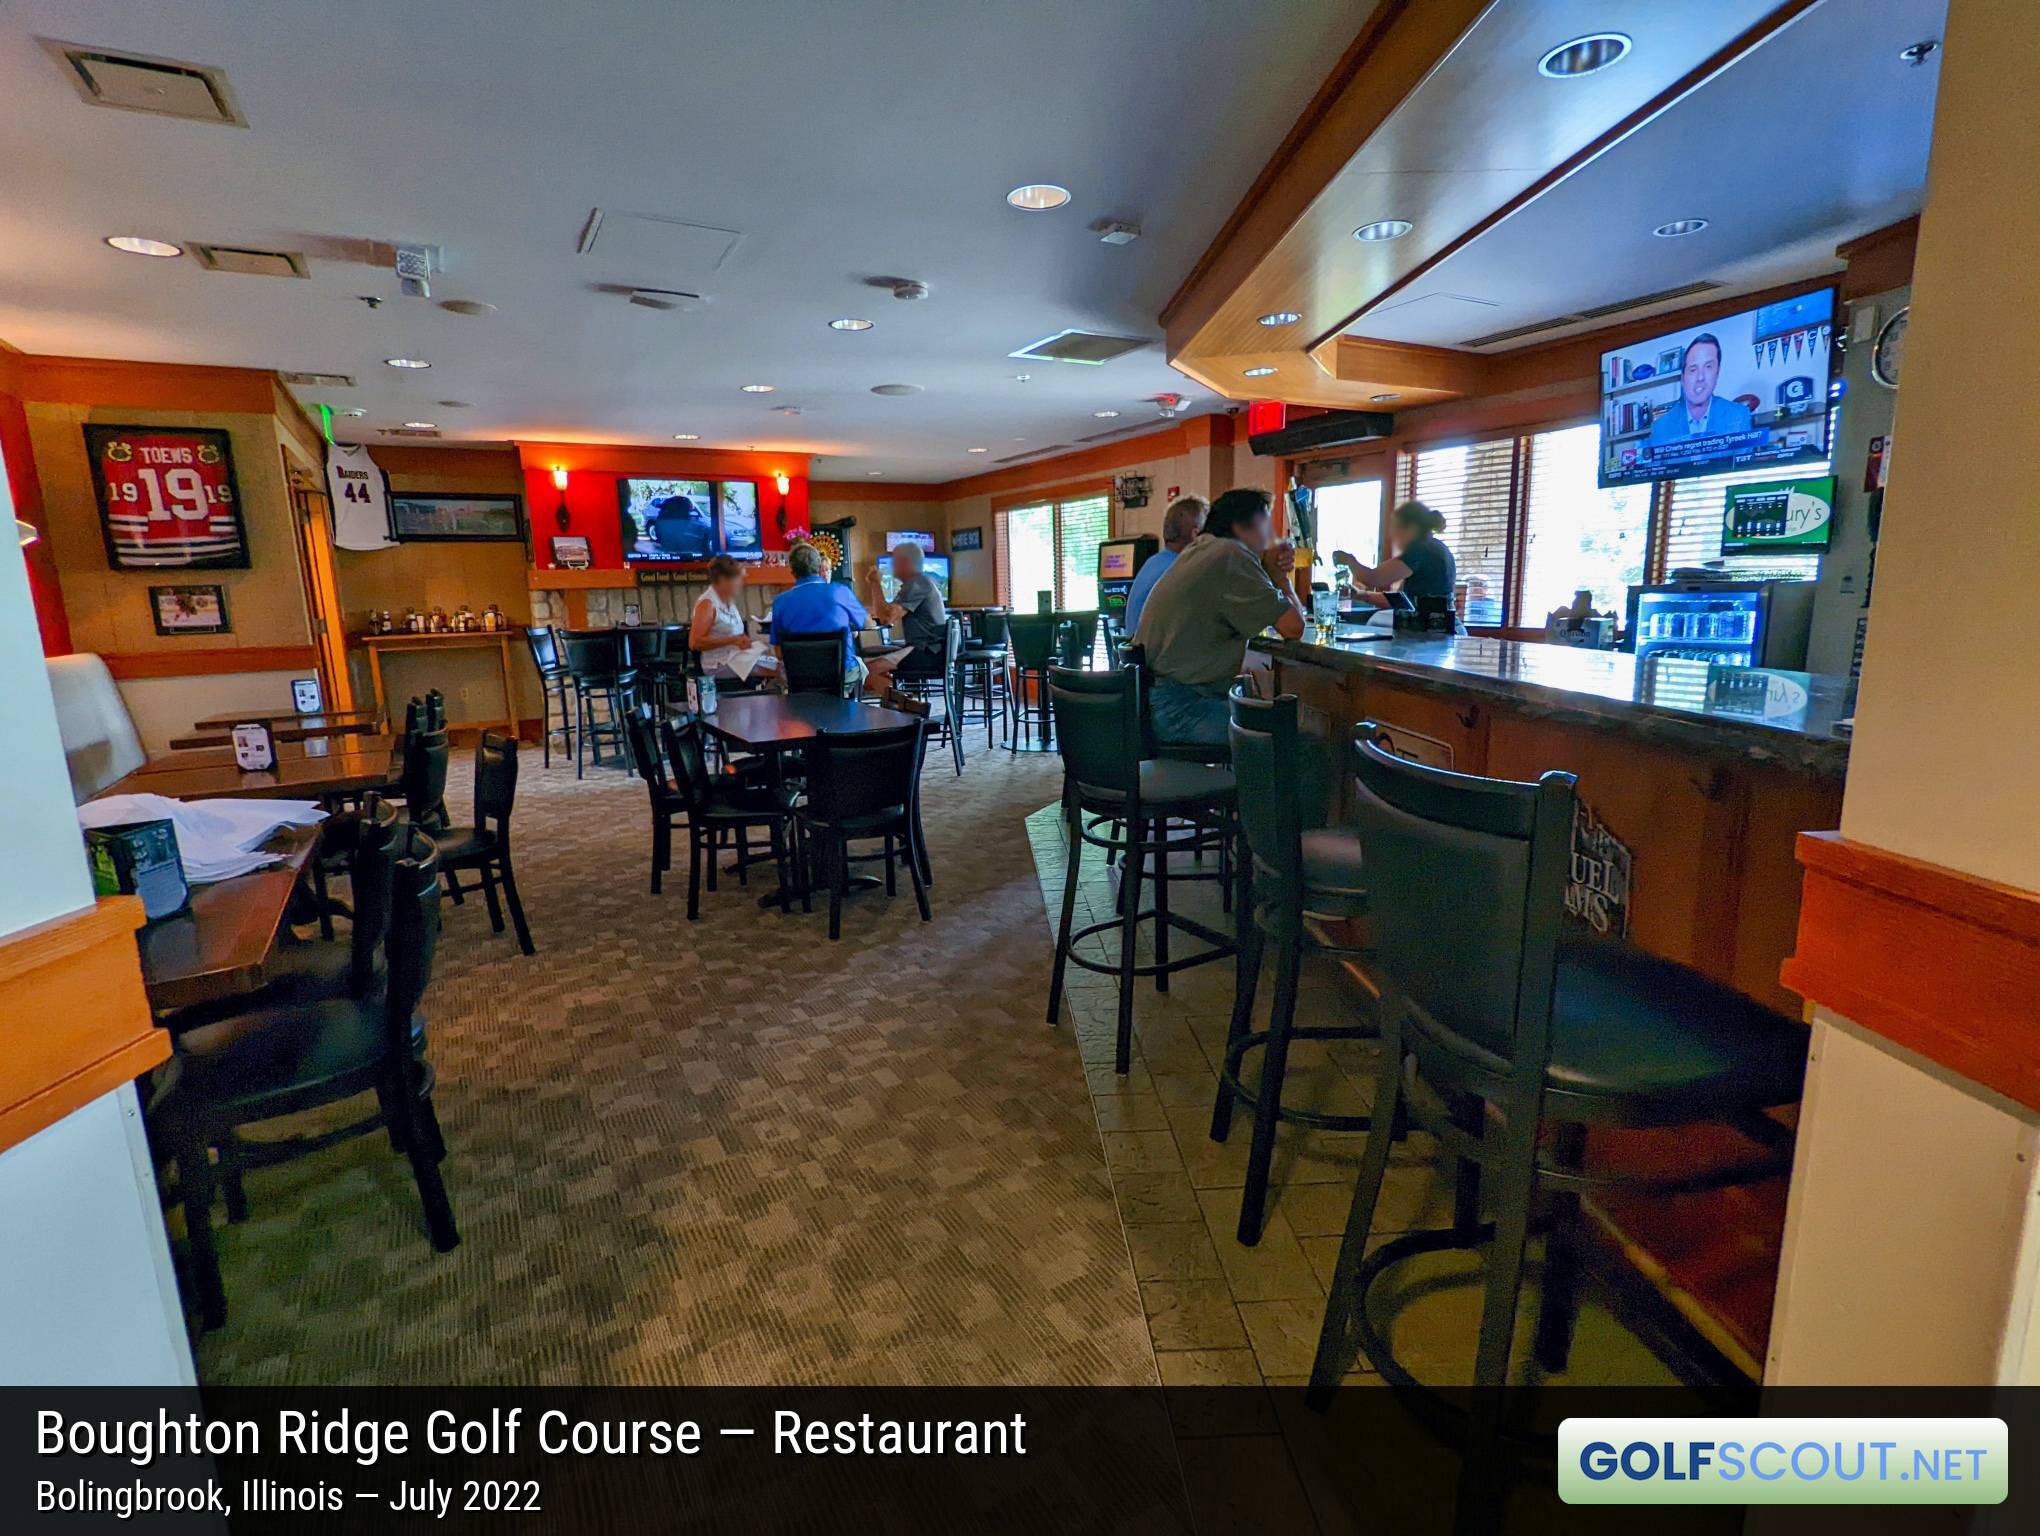 Photo of the restaurant at Boughton Ridge Golf Course in Bolingbrook, Illinois. 